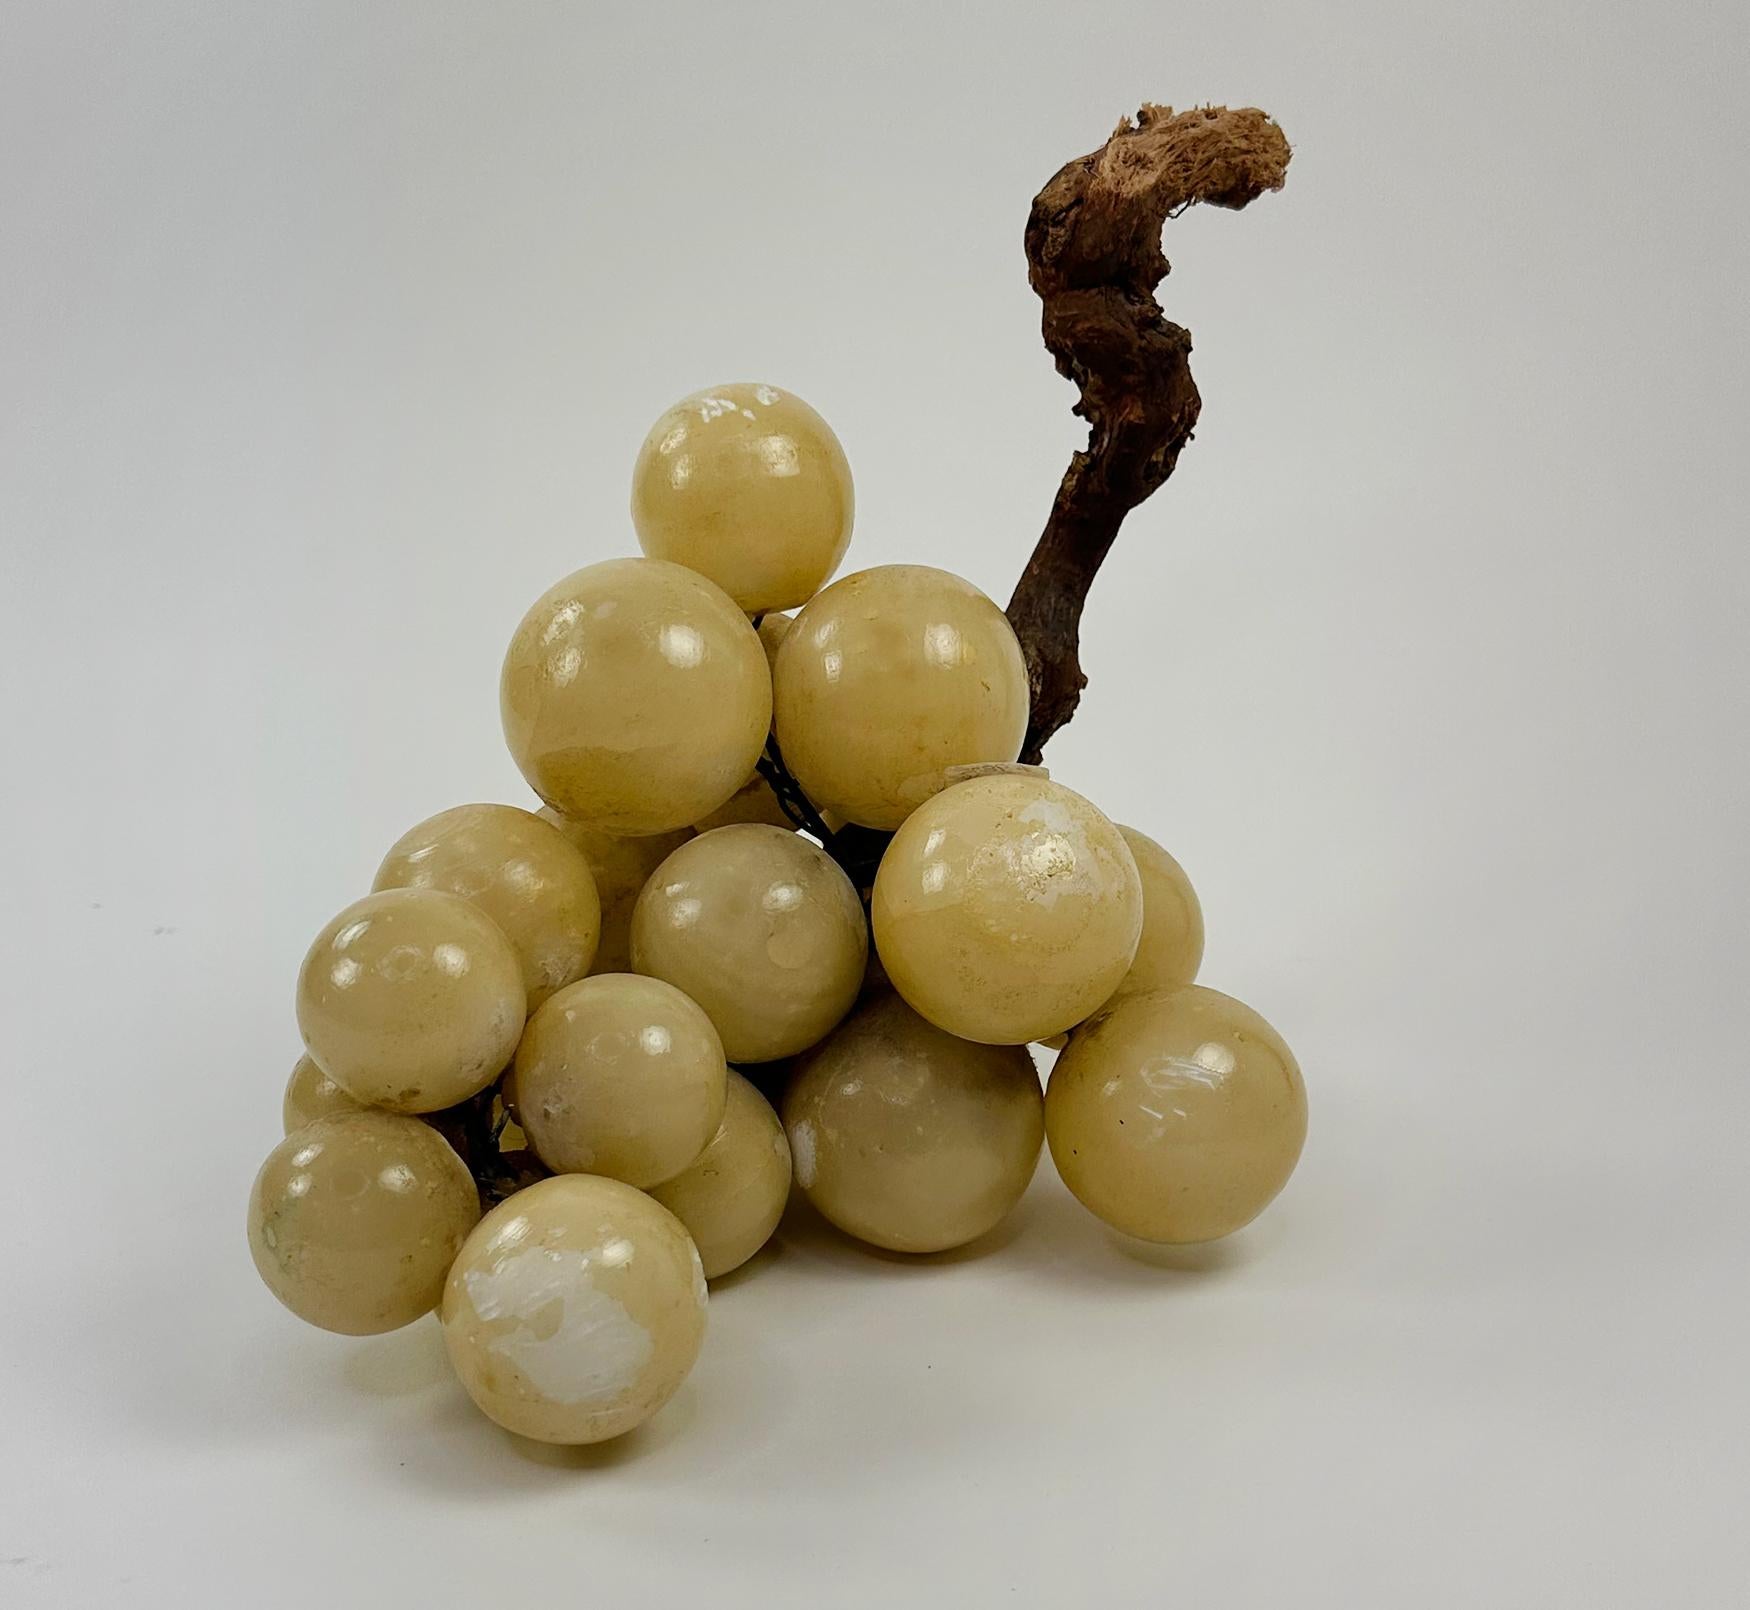 A handsome cluster of large-scale mid-century Italian grapes made in alabaster with a stem of genuine grape vine. Alabaster’s naturally shady color gives the grapes dimension and impact. Custom made and wired together by hand. This piece has scale